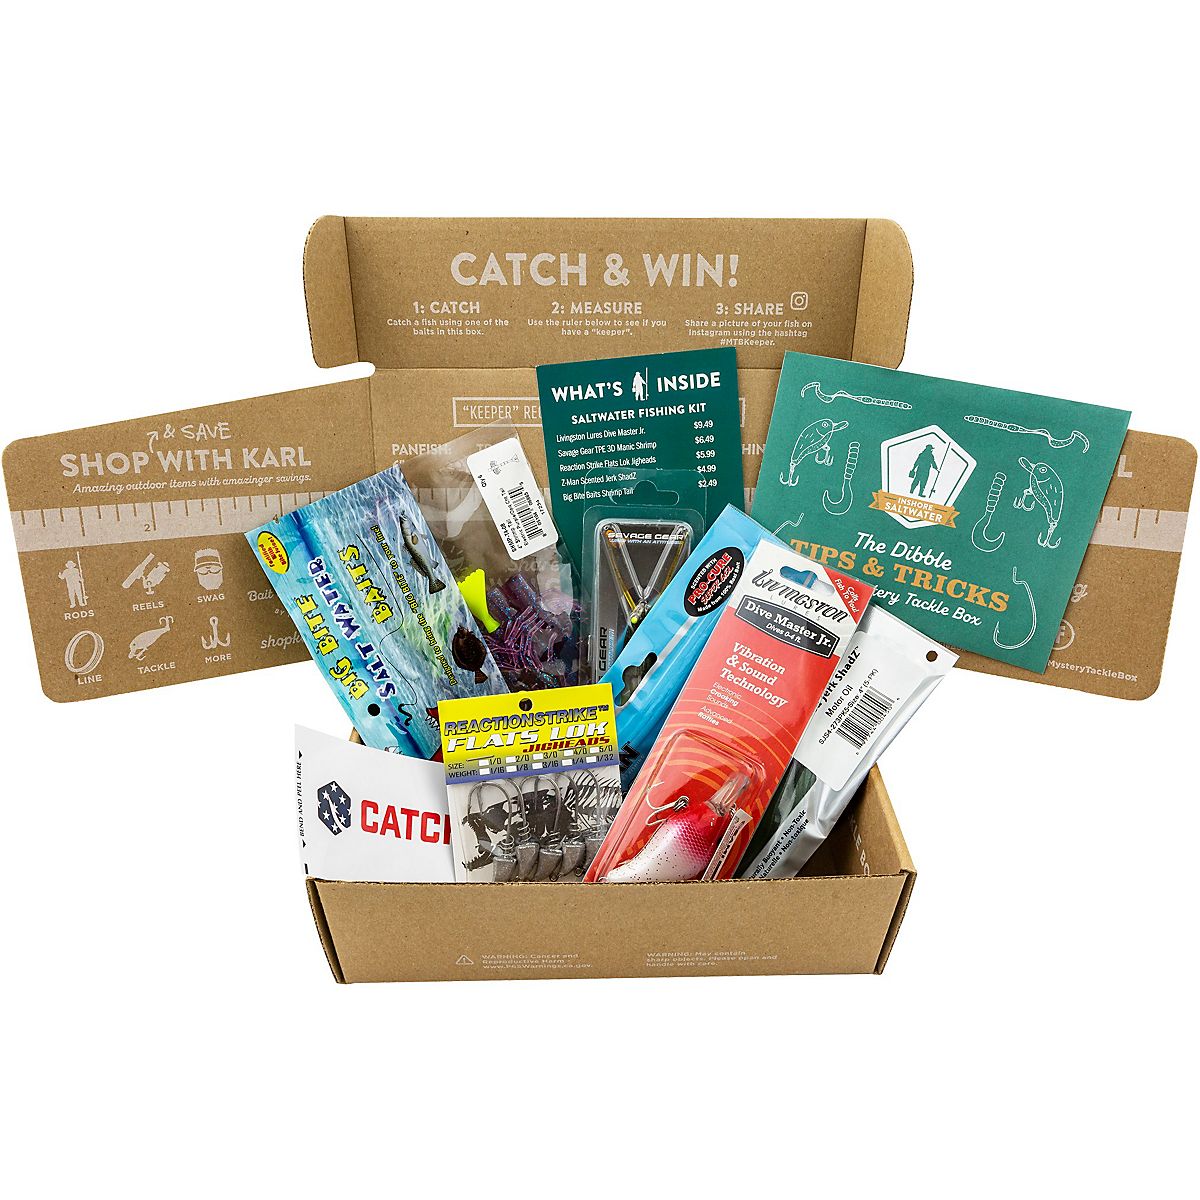 Mystery Tackle Box Saltwater Fishing Kit